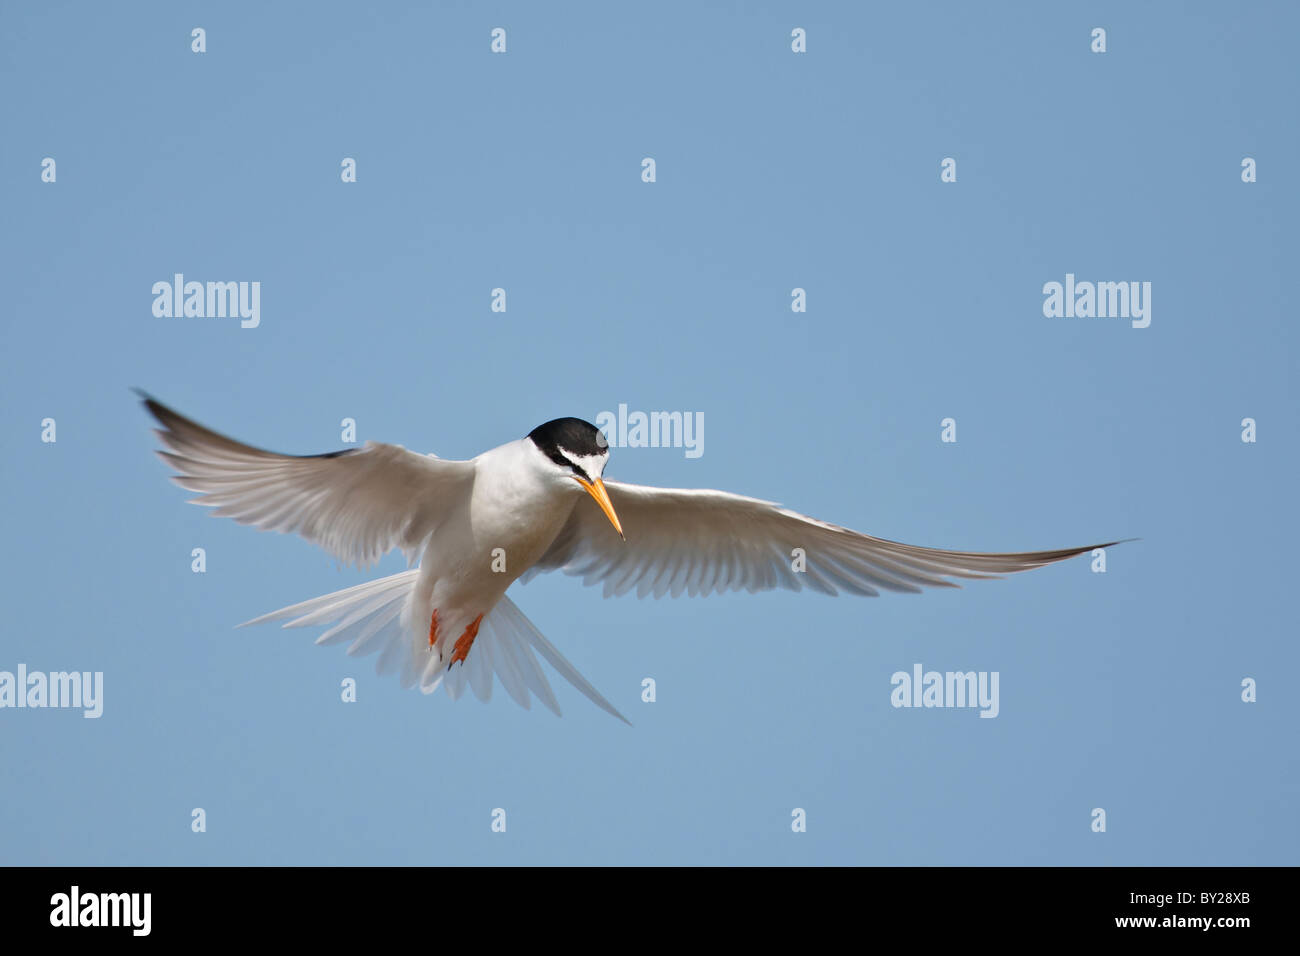 Little tern hovers against a clear blue sky. Stock Photo